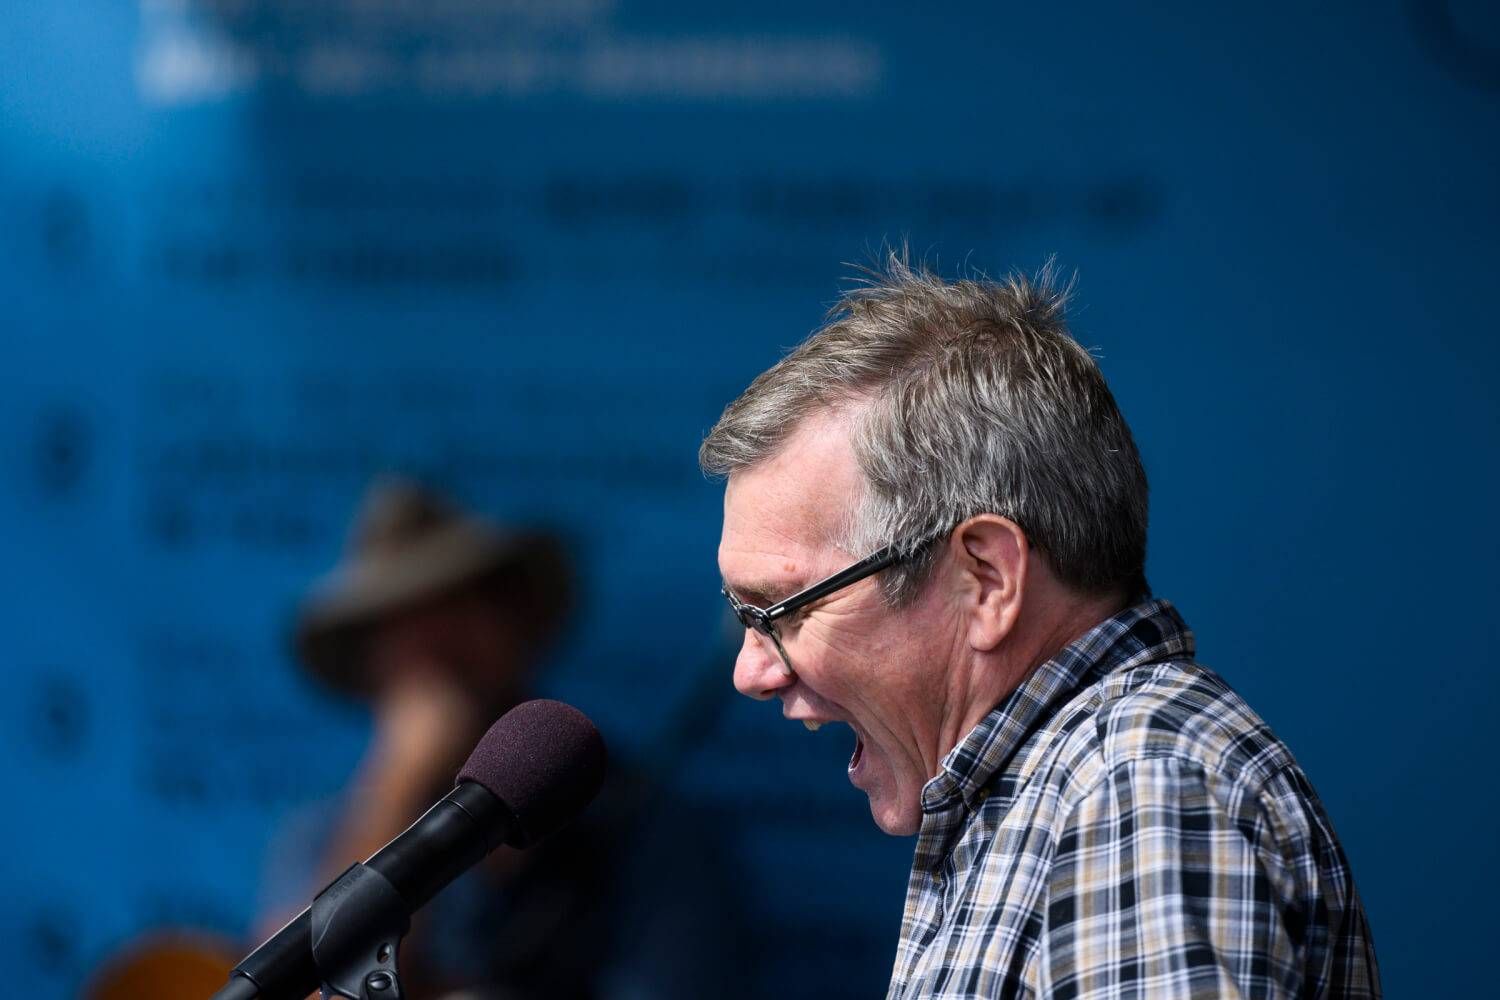 Storyteller Kevin Kling regales the audiences at the live taping of Almanac at the MPR booth on August 23, 2019. Photo by Matt Mead.